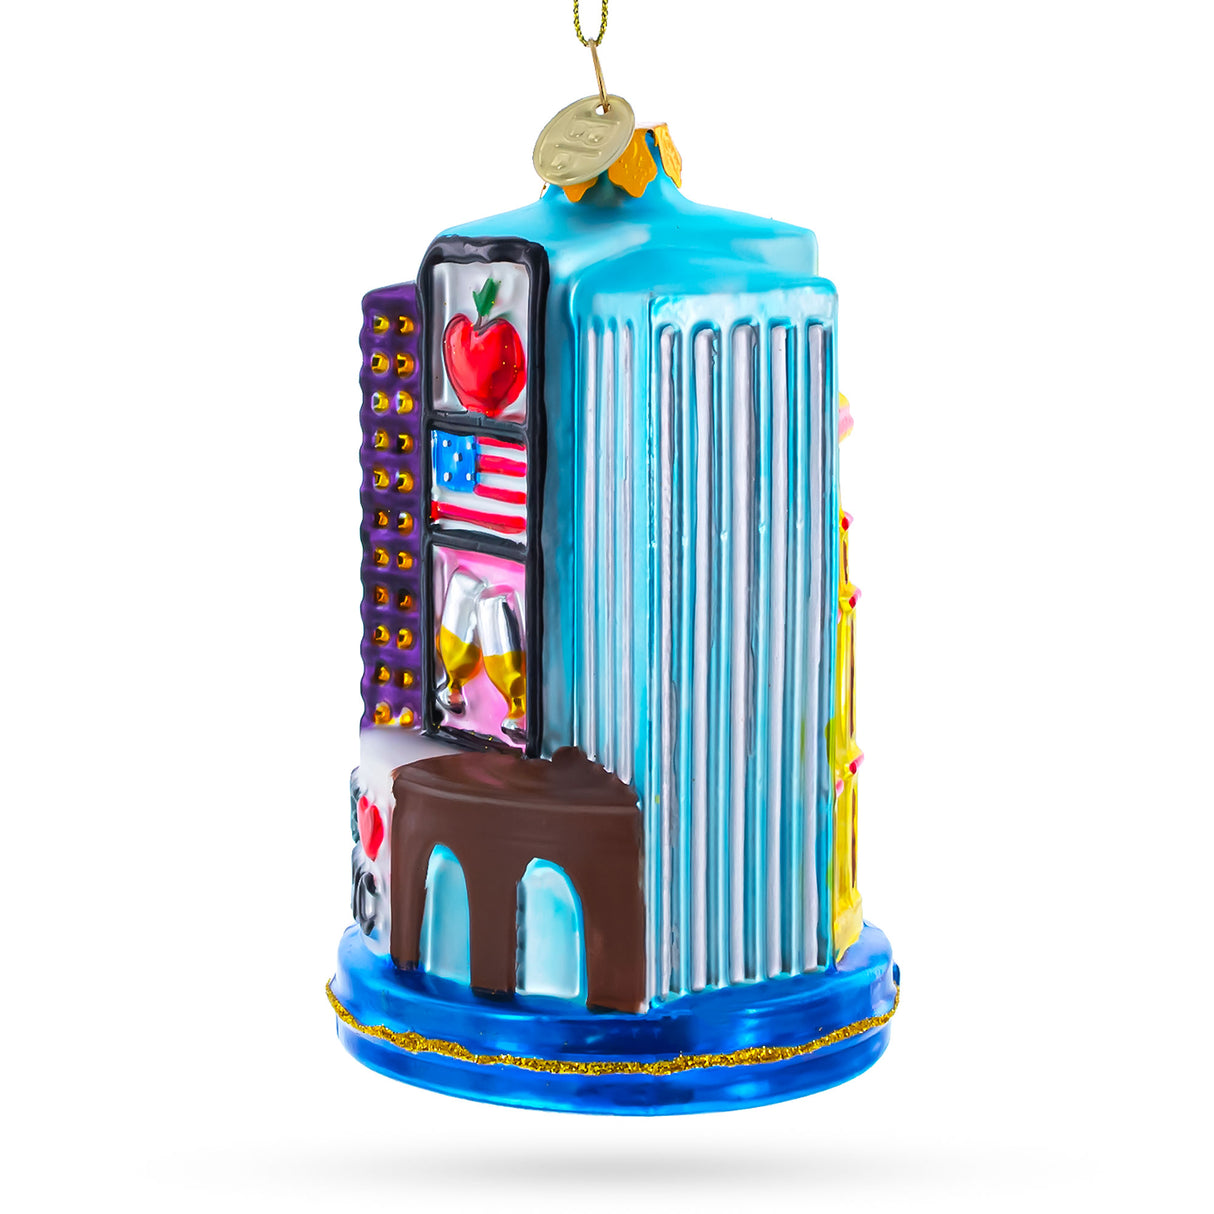 New York City Attractions - Blown Glass Christmas Ornament ,dimensions in inches: 3.8 x 2.7 x 3